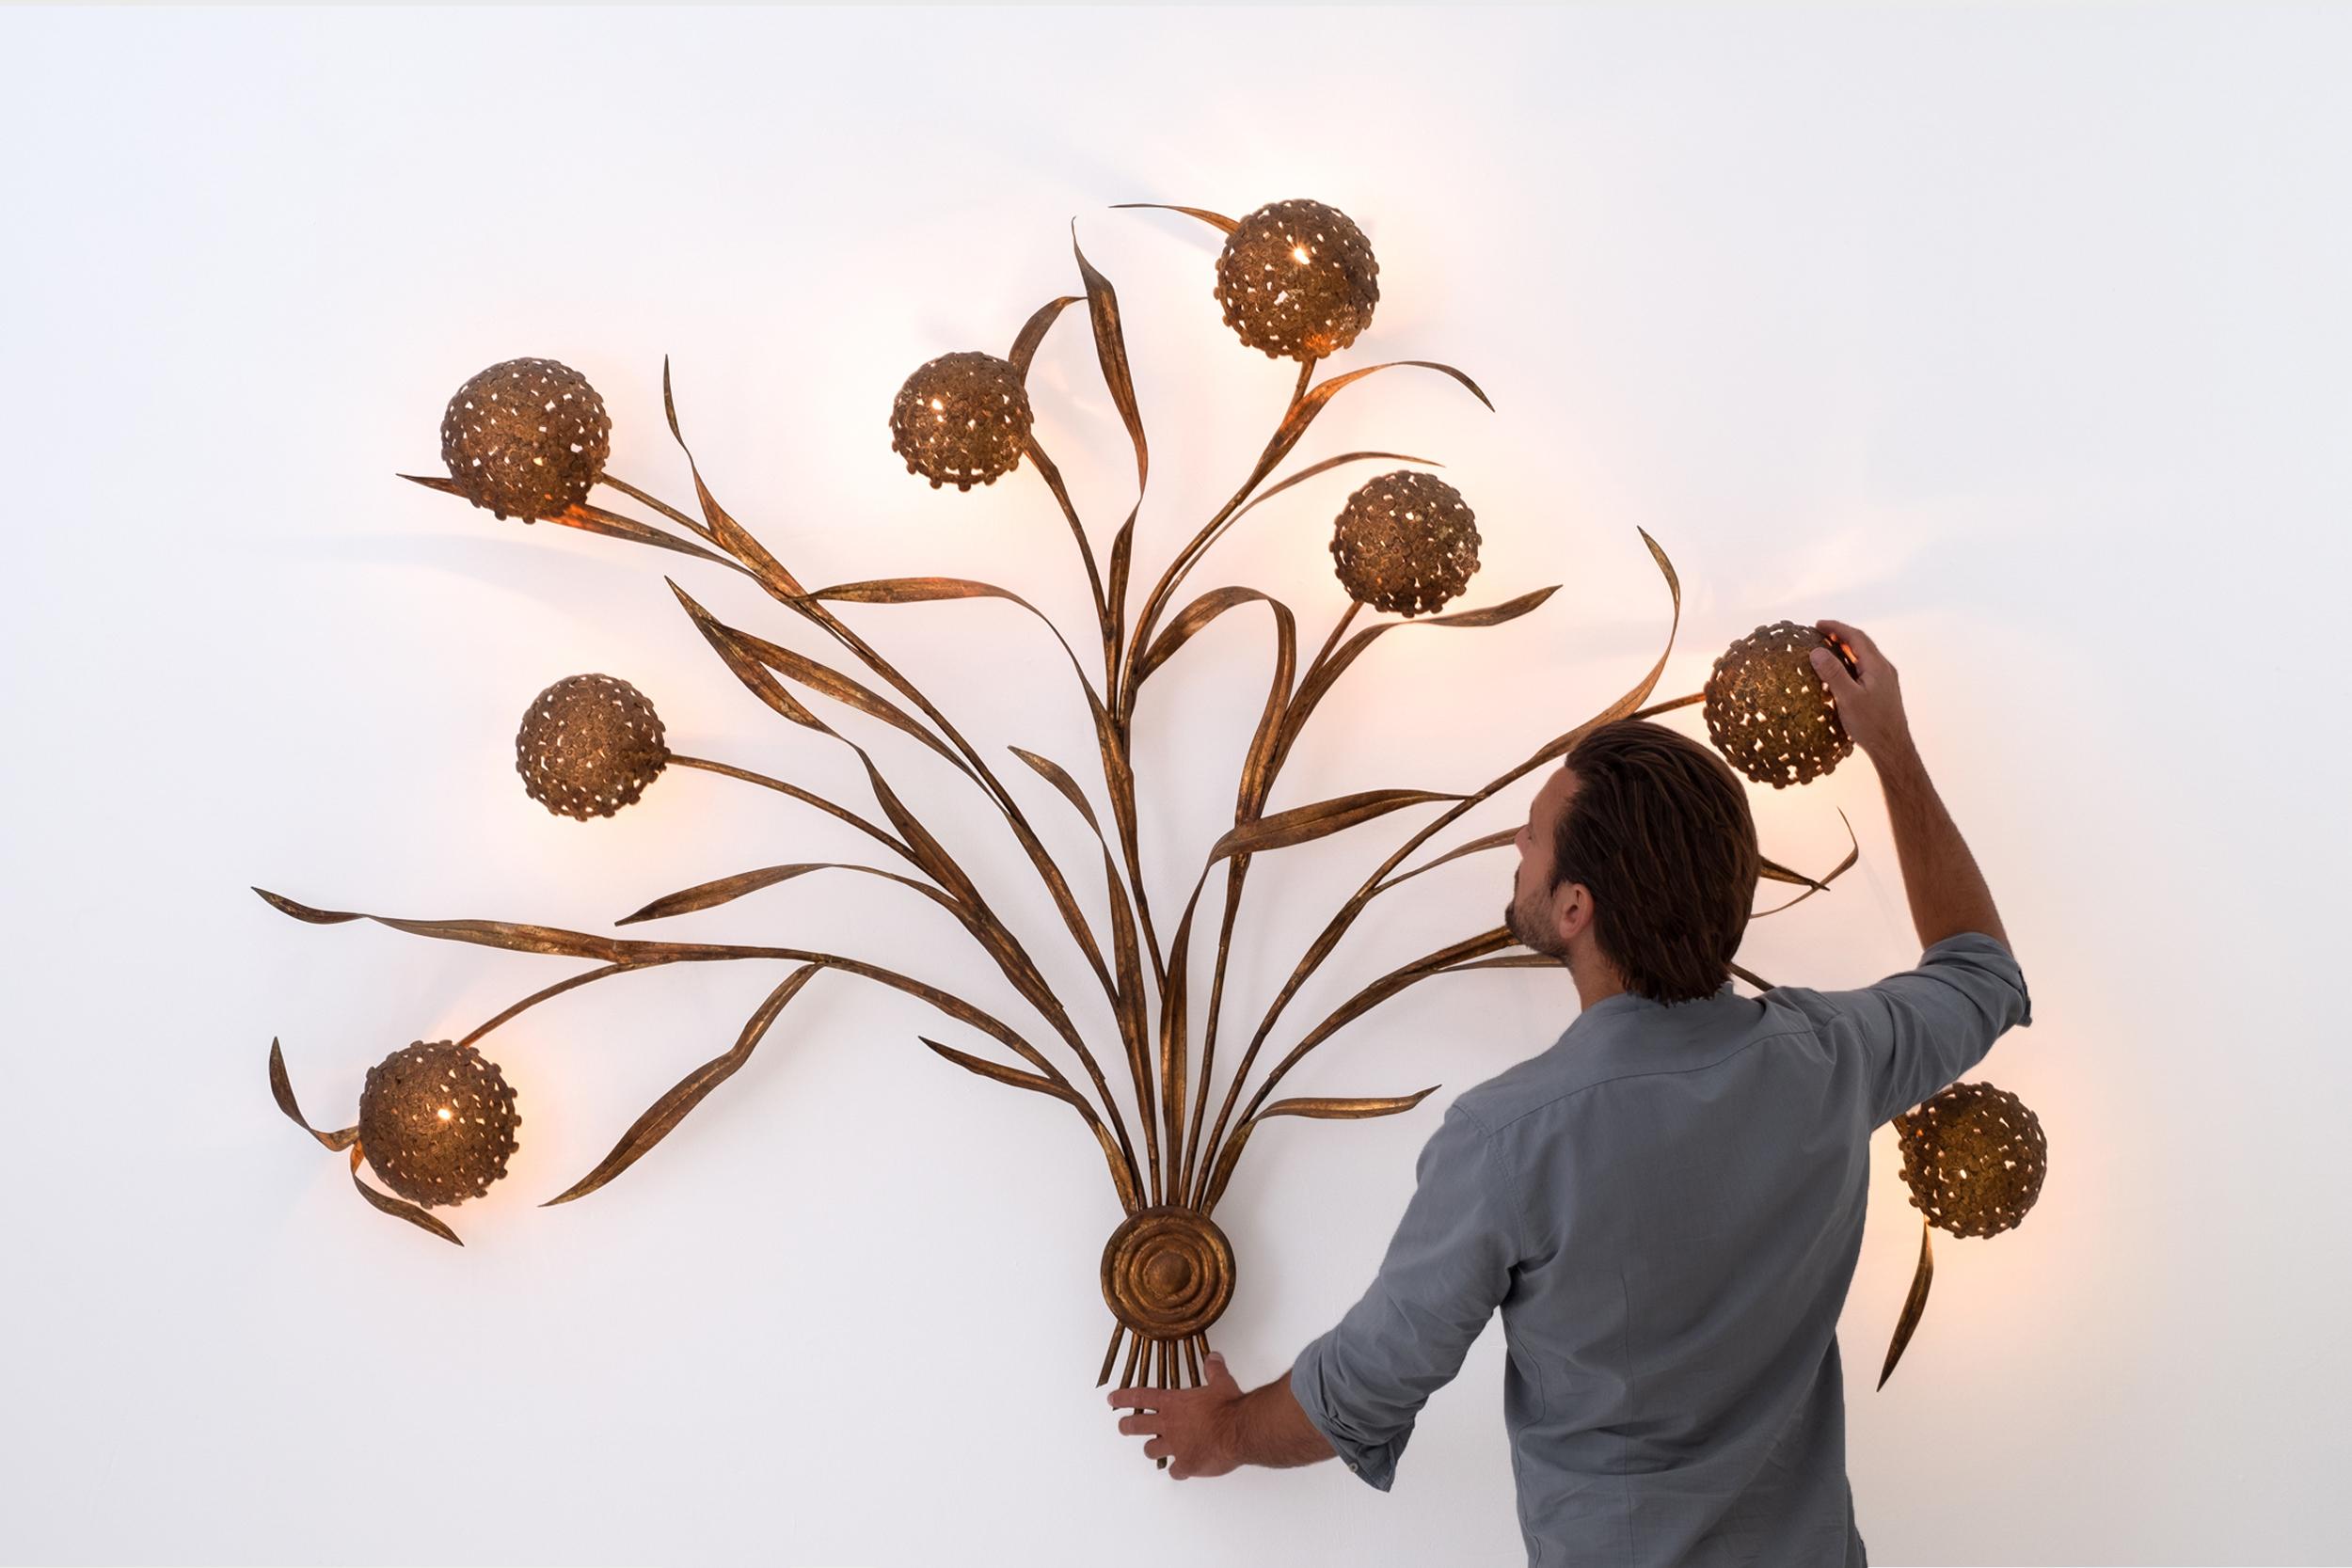 Huge Italian Mid-Century Modern gilded wheat leaves wall lamp, Italy 1950s.
The enormous leaves and flowers are made from Gilded metal, all handmade. Each flower ball hides a light socket, means 8 light sockets in total. The lamp comes from an old